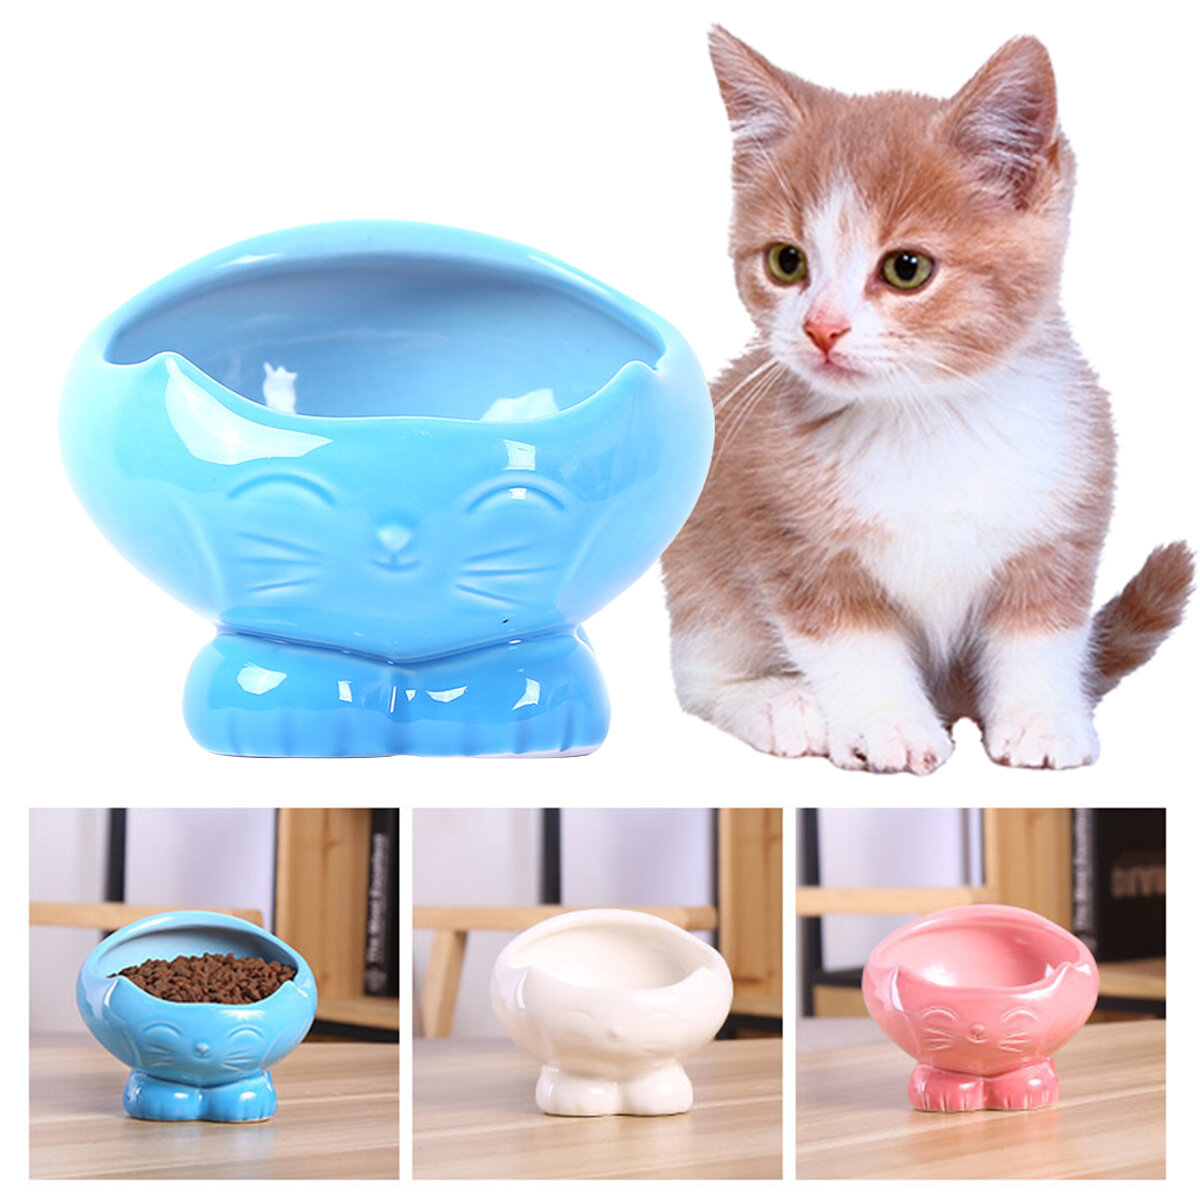 Cats Feeding Pet Bowl Food Ceramic Bowl Puppy Dogs Snack Water Feeder, Banggood  - buy with discount